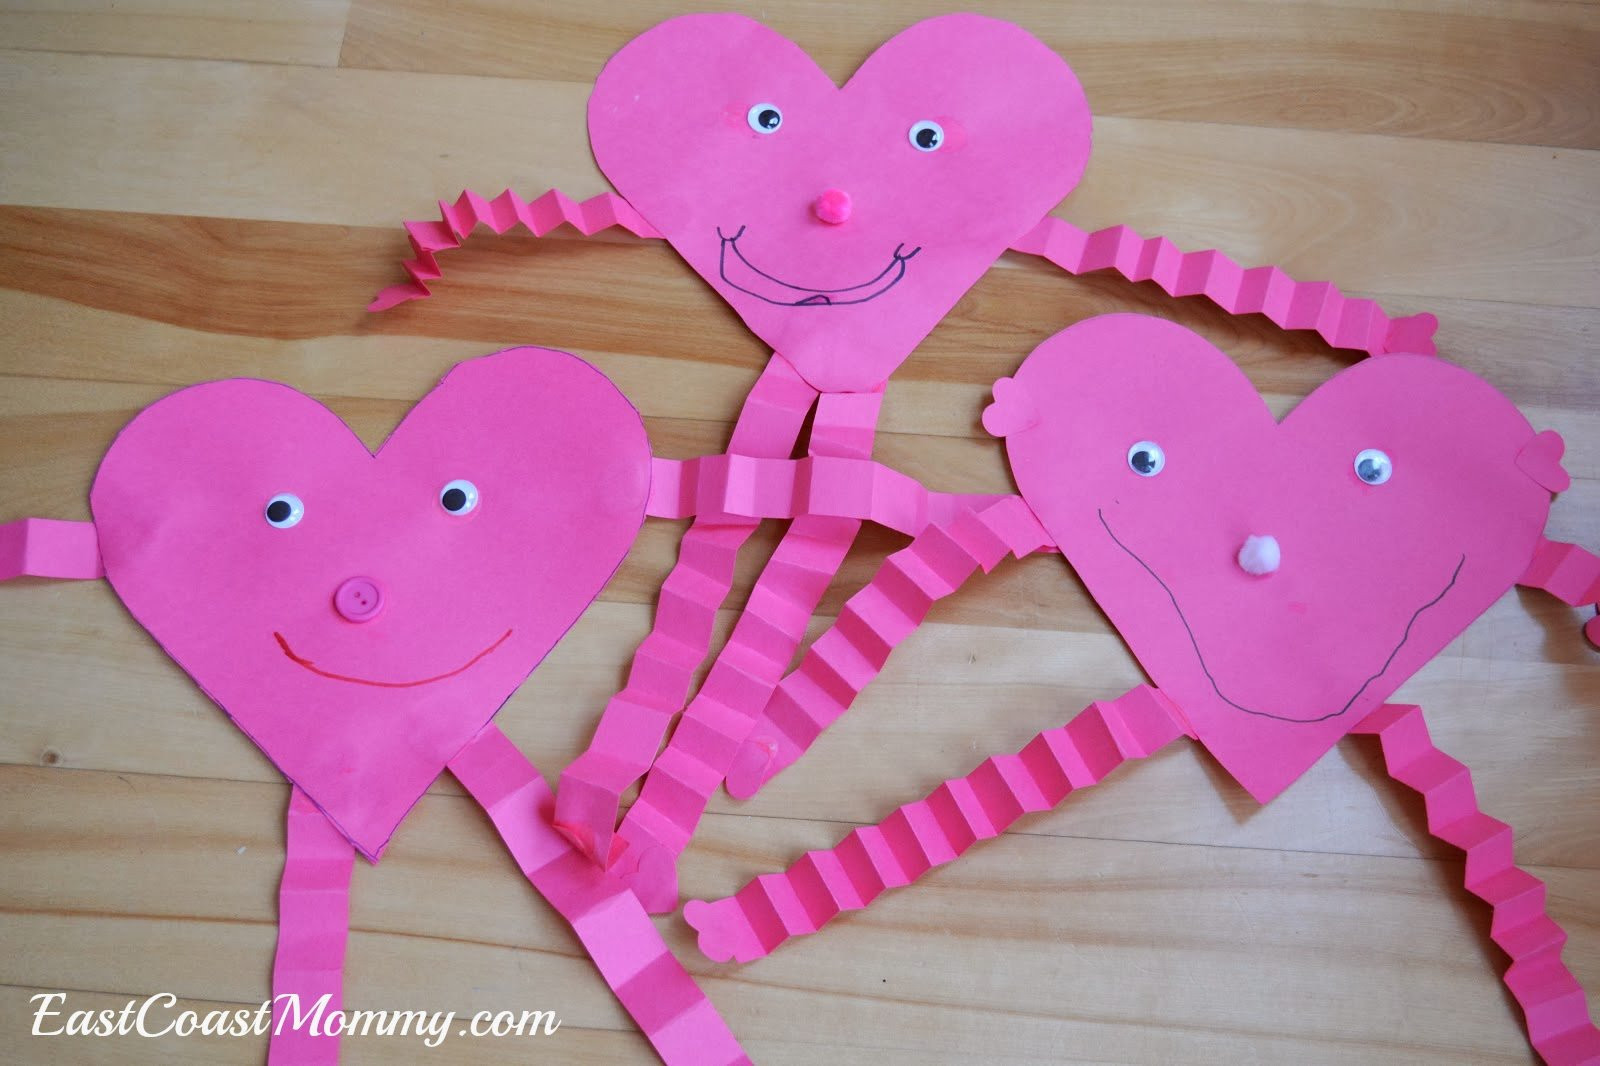 Heart Craft Ideas For Preschoolers
 12 Easy Valentine Crafts for Toddlers & Preschoolers You